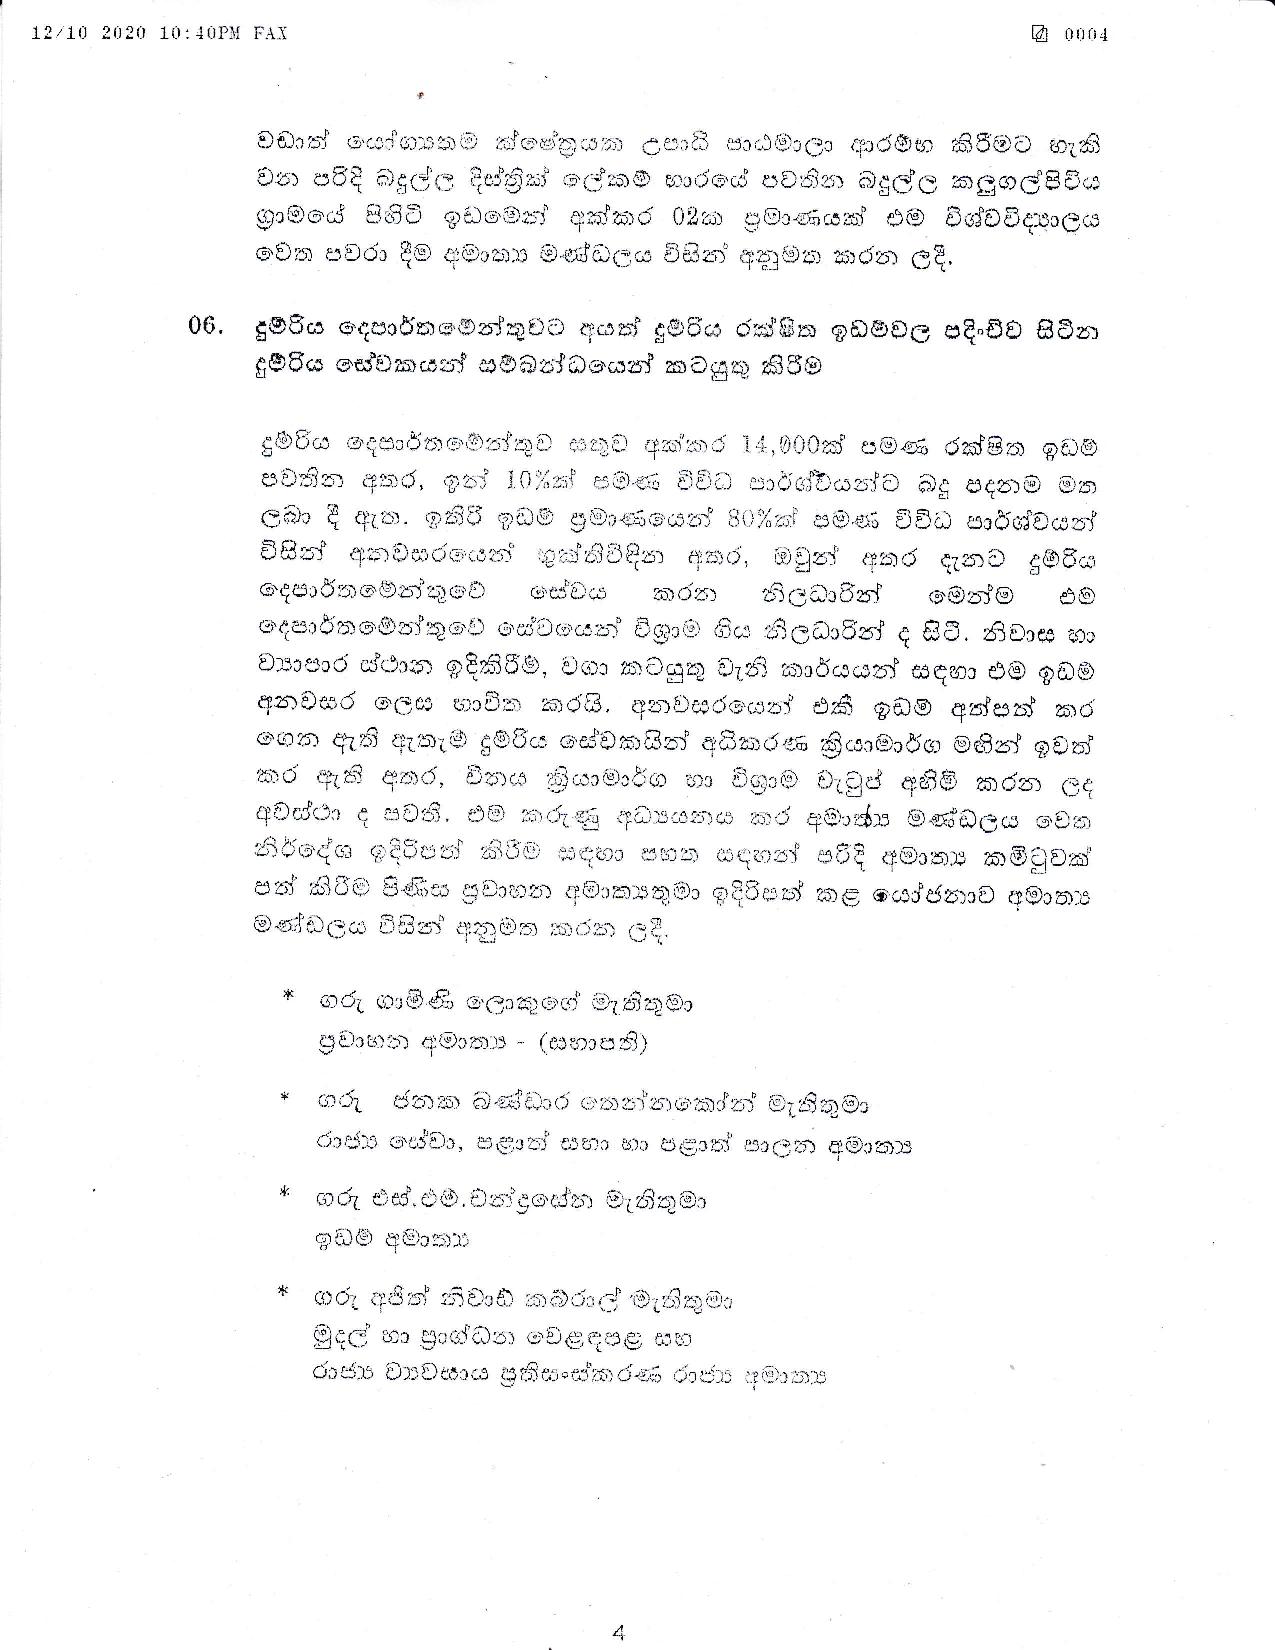 Cabinet Decision on 12.10.2020 page 004